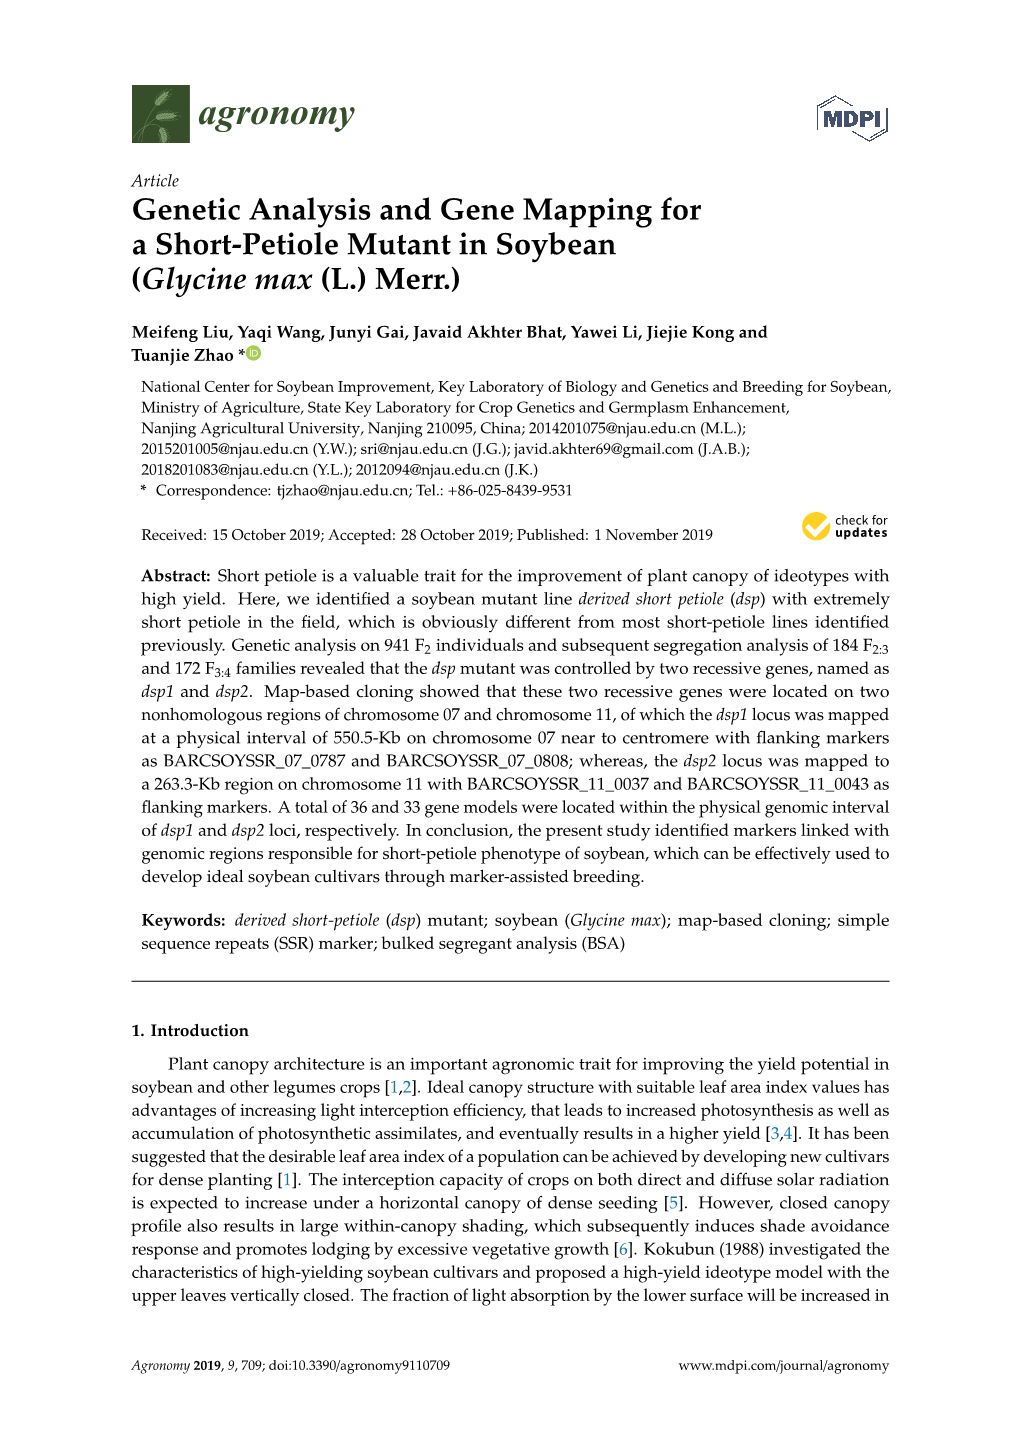 Genetic Analysis and Gene Mapping for a Short-Petiole Mutant in Soybean (Glycine Max (L.) Merr.)